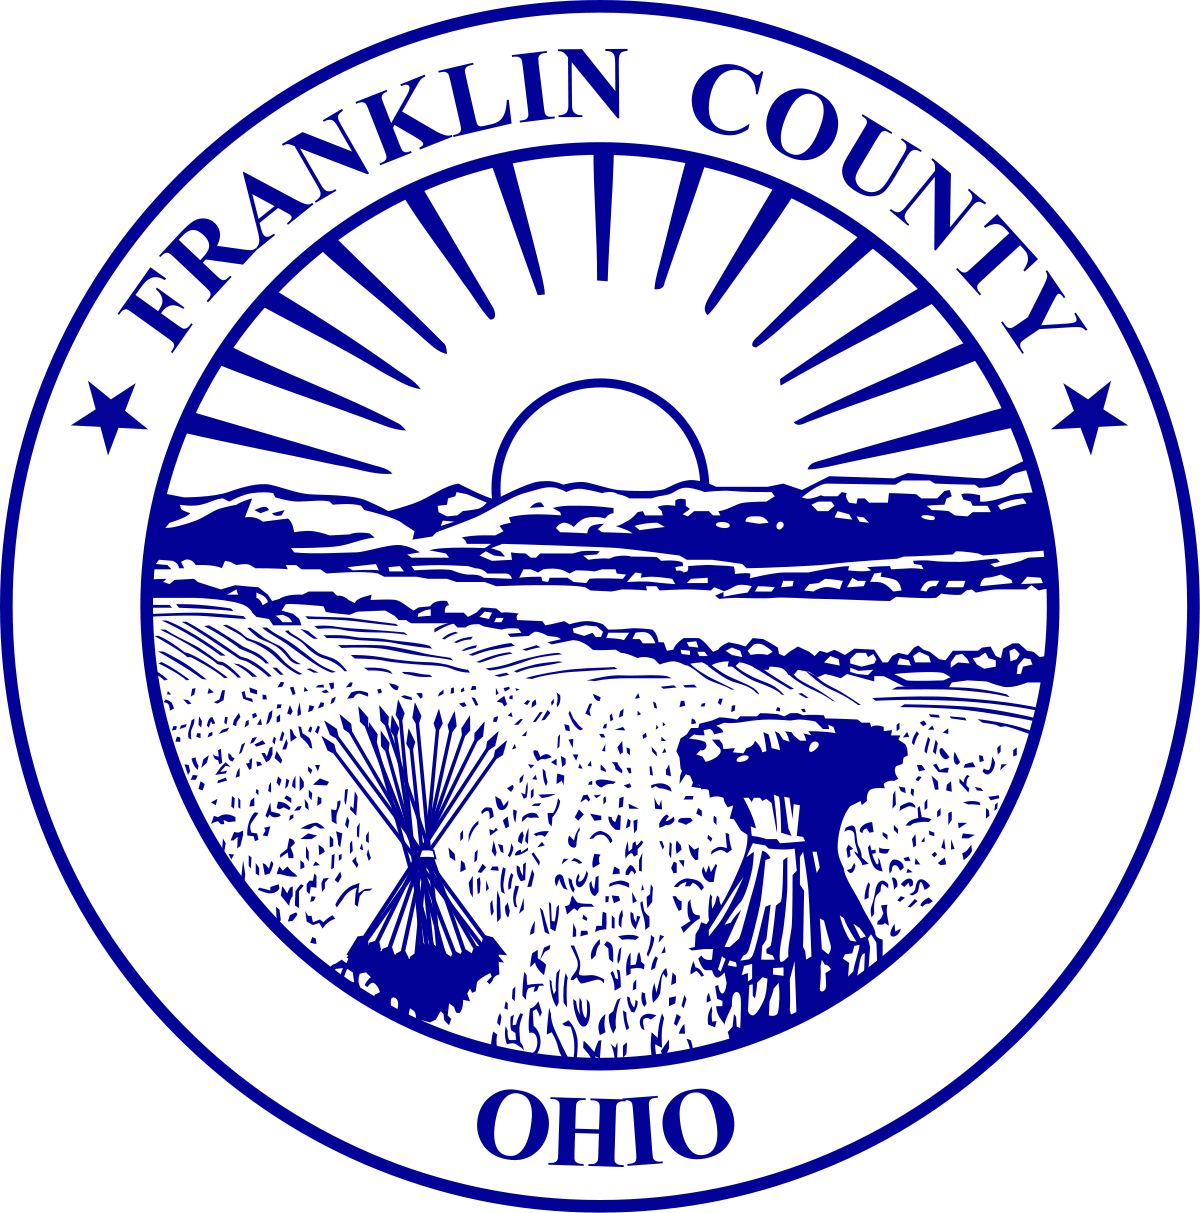 The seal for Franklin County, Ohio.